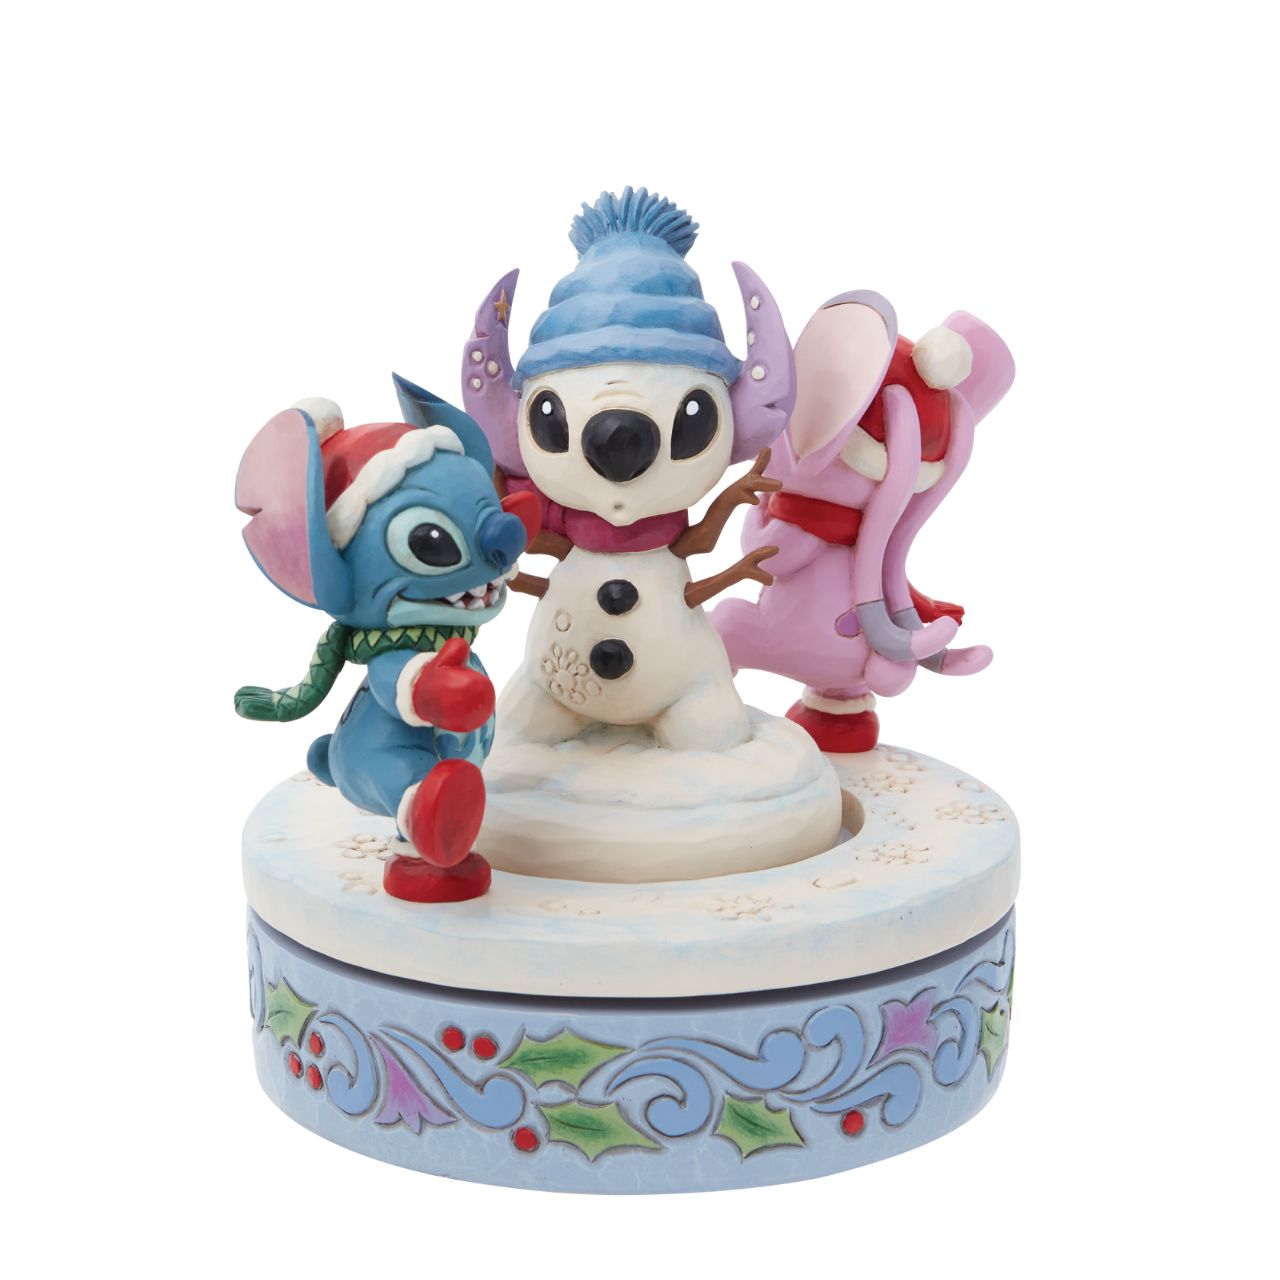 Disney Stitch & Angel Rotating Figurine by Jim Shore  Disney's Stitch and Angel are playing in the snow with their extra special Snowman this Christmas. Hand rotatable, they chase each other round and round. Designed by award winning artist Jim Shore, hand crafted from high quality cast stone and hand painted.